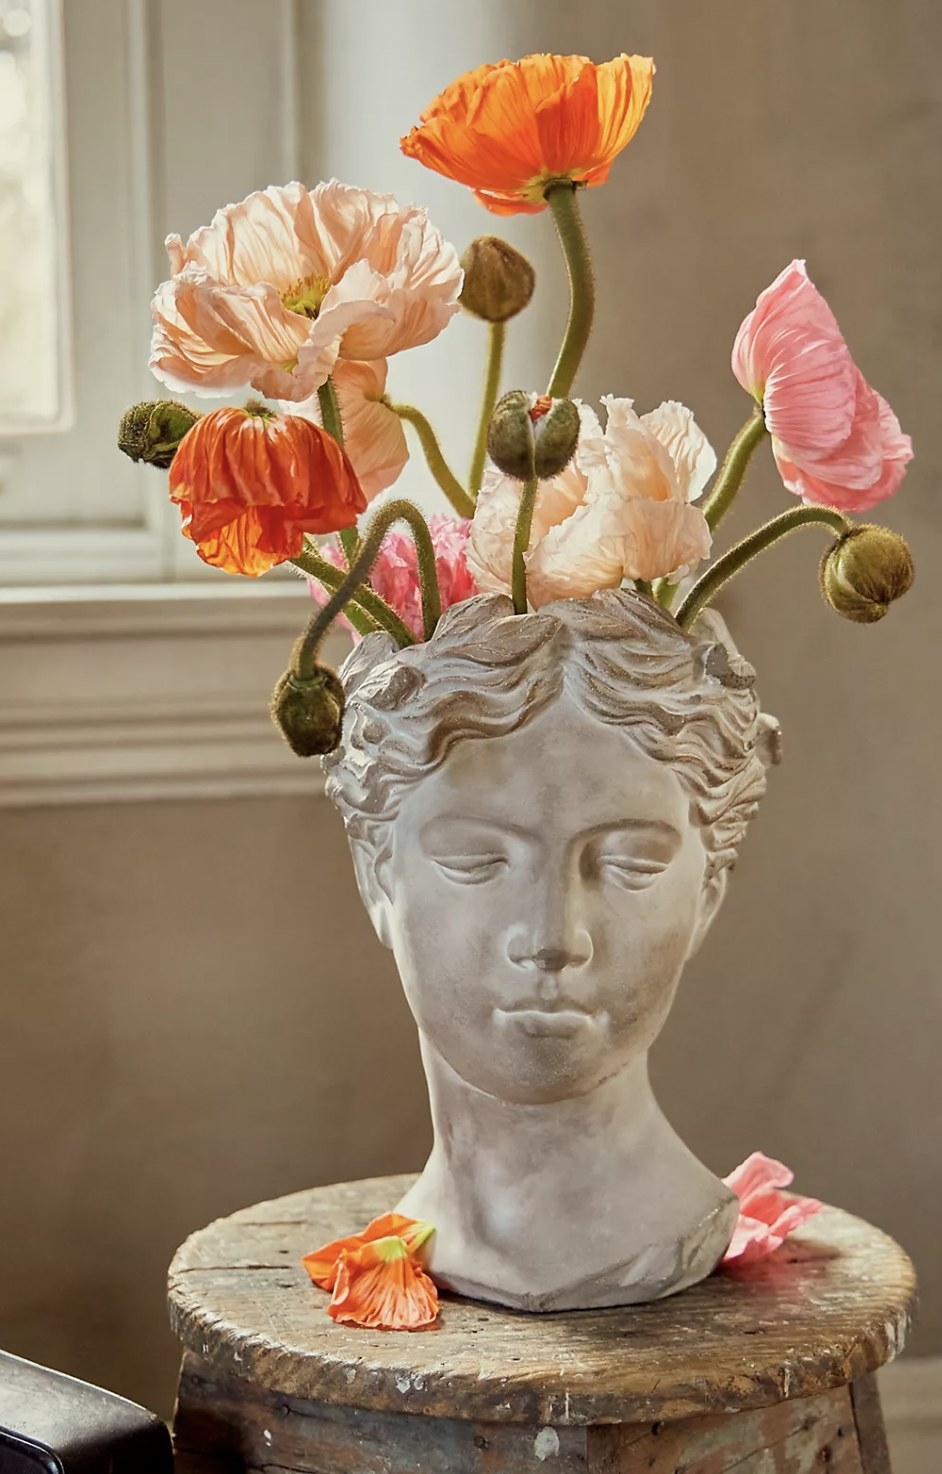 The bust pot with flowers bursting out of top head opening